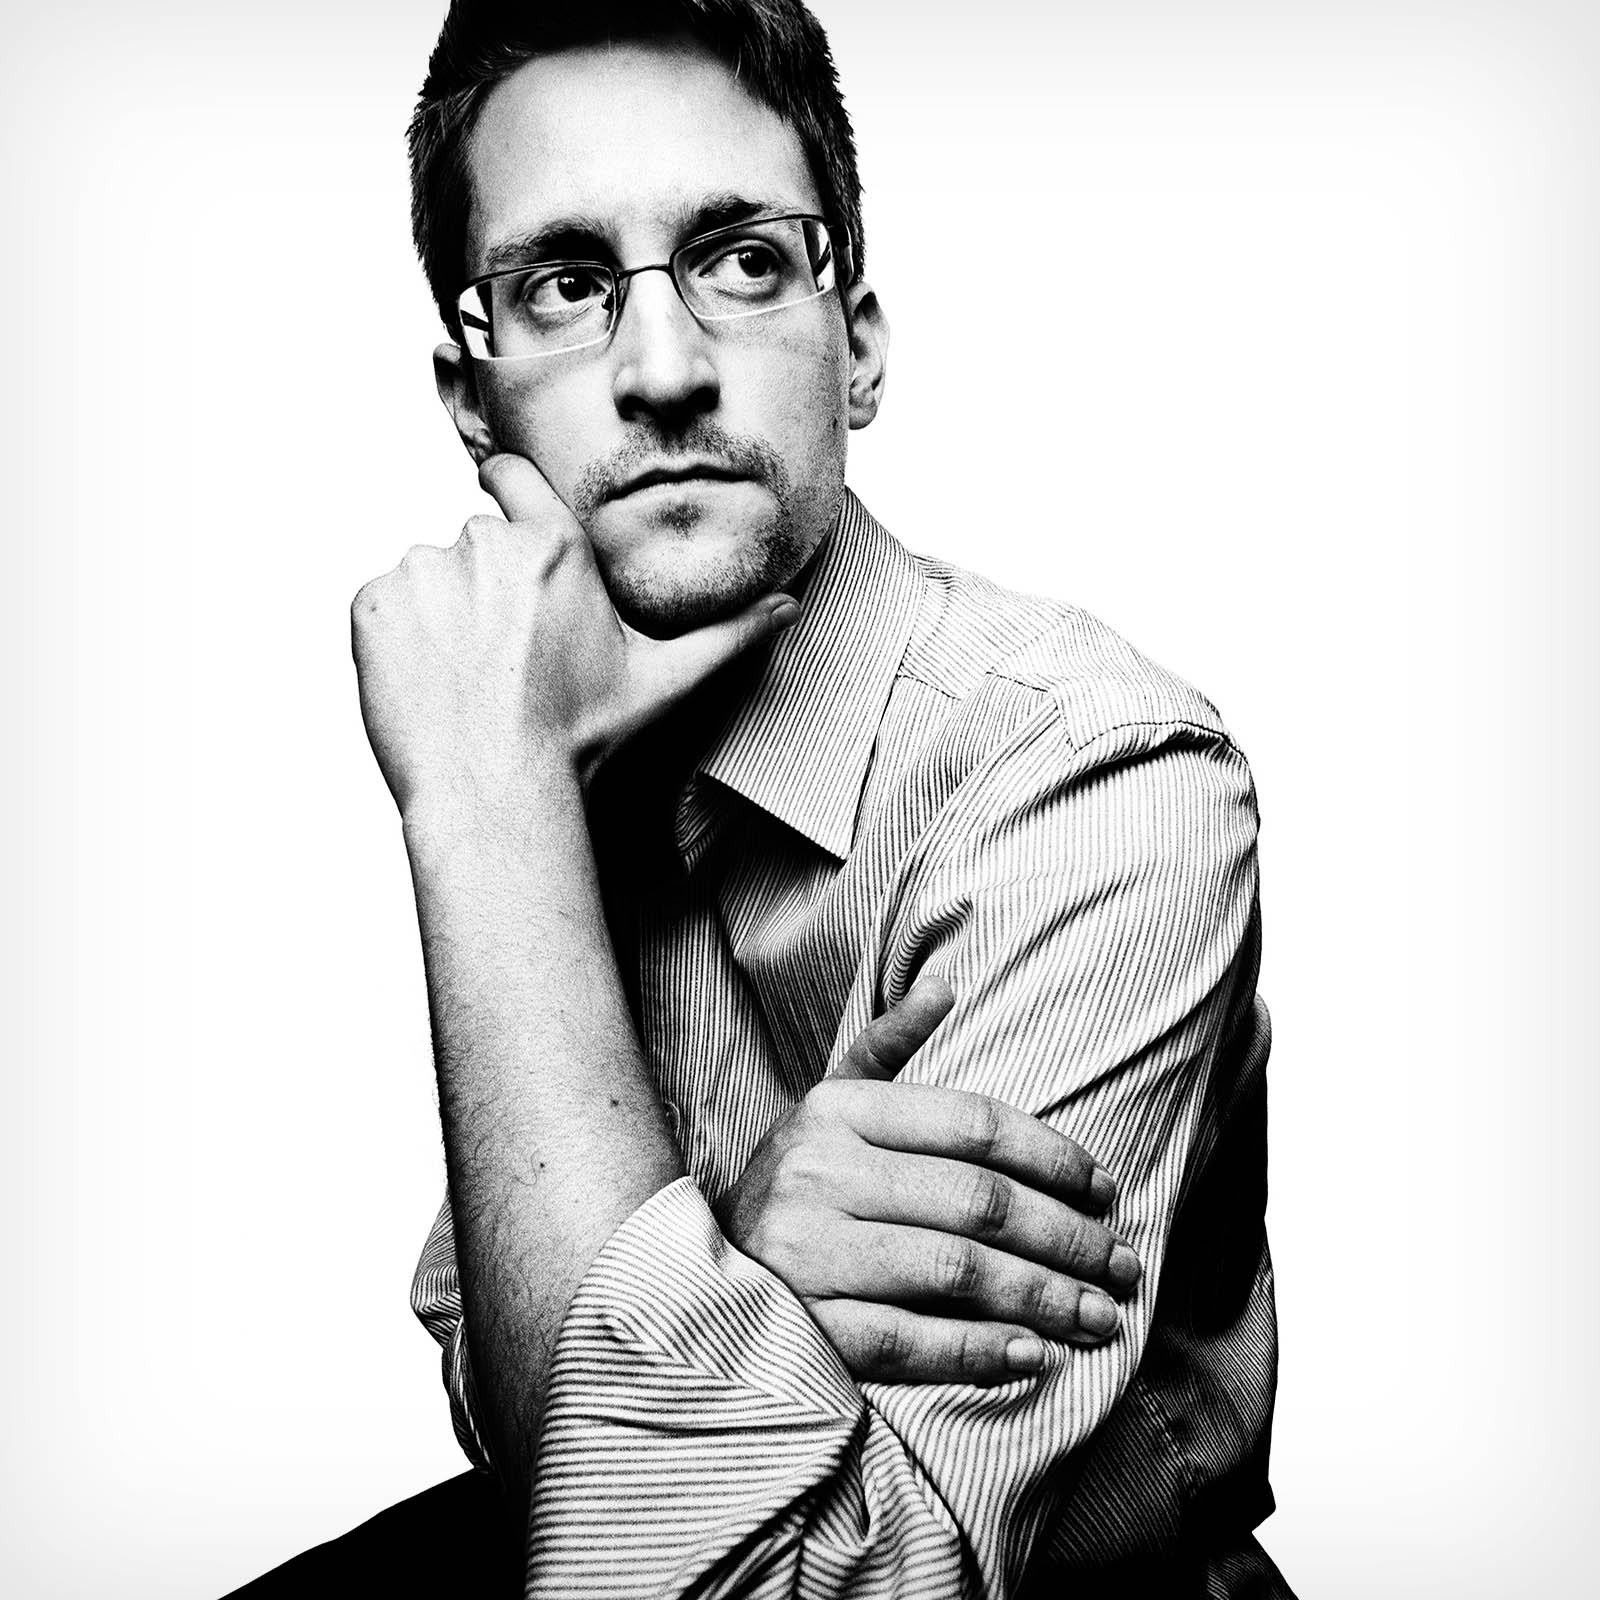 Edward Snowden Launches Open Source Safe Room App